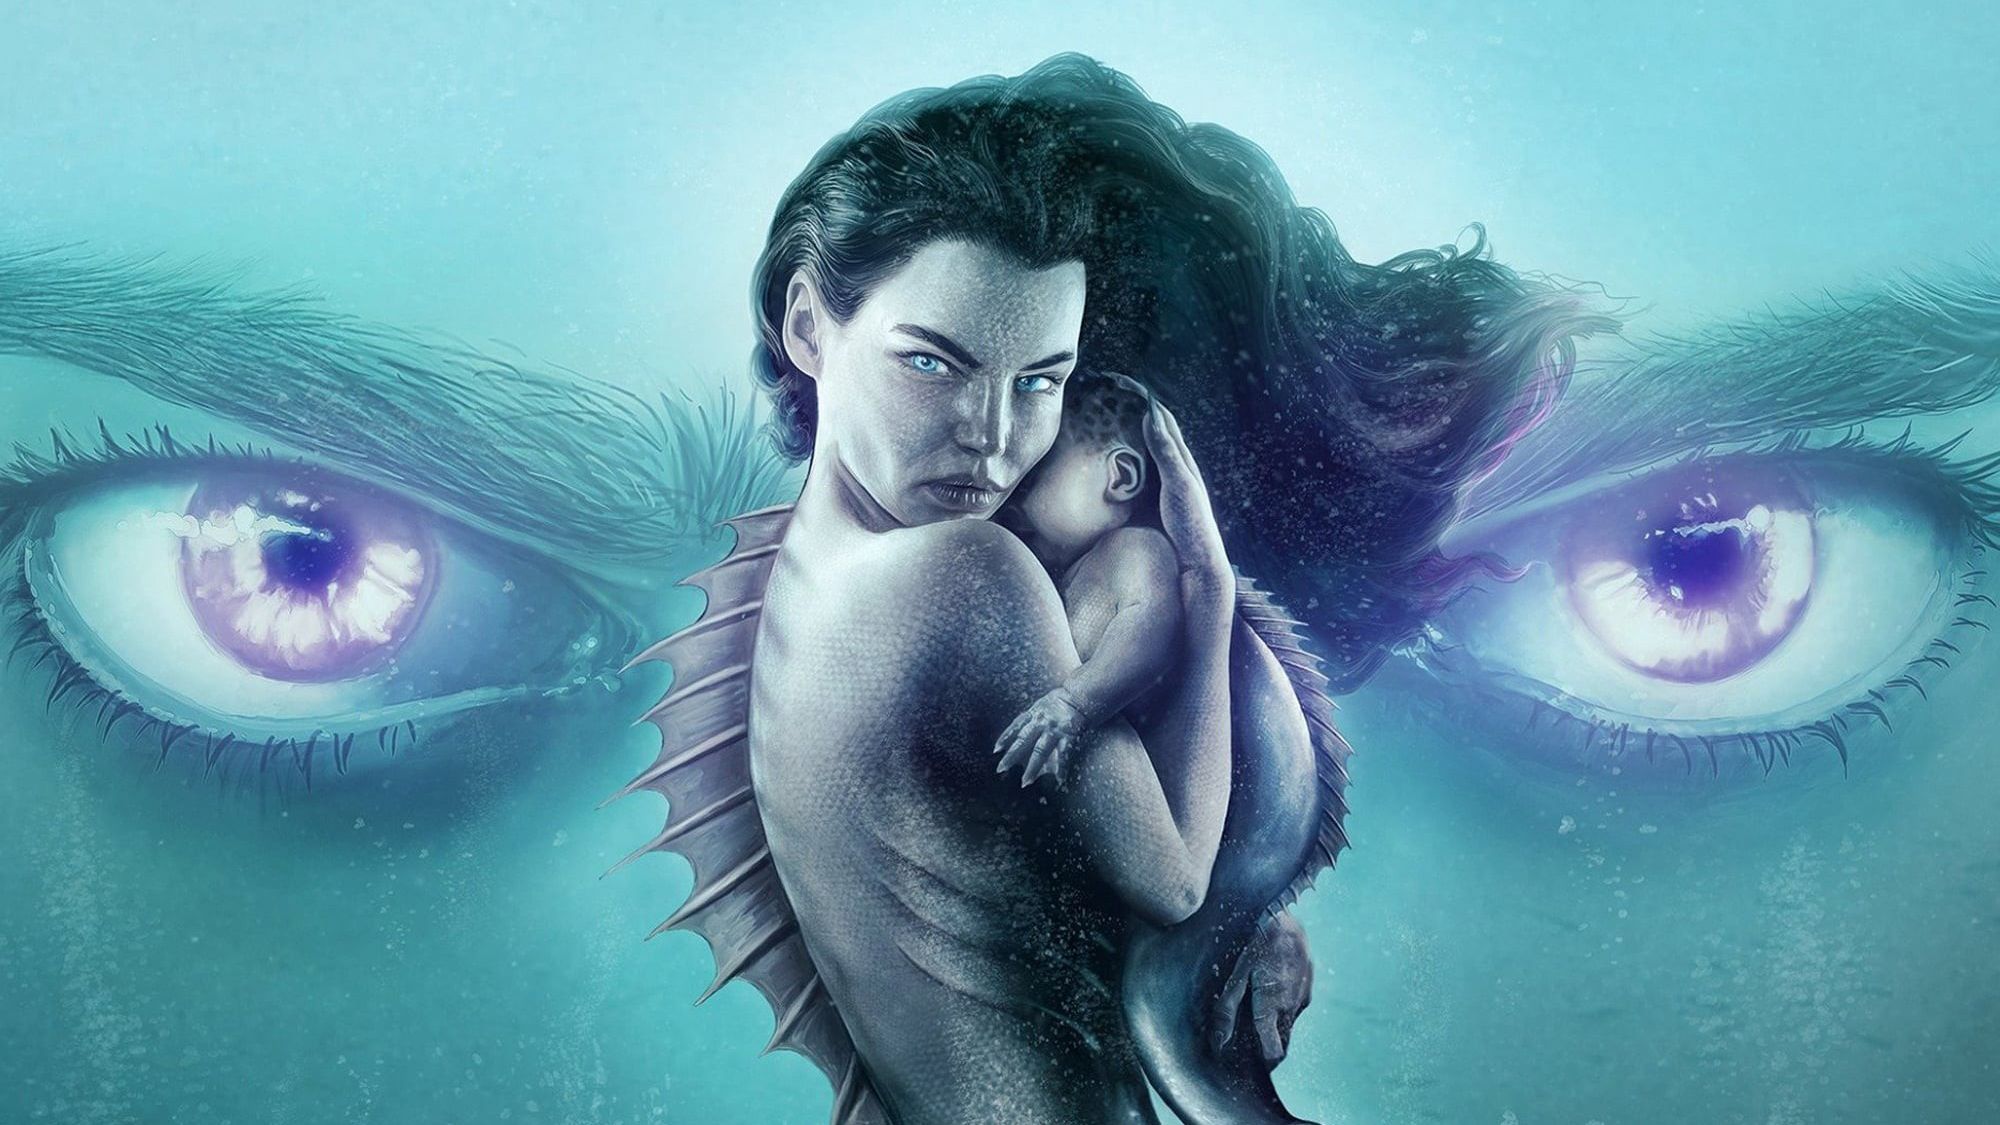 Siren Tv Series Poster, HD Tv Shows, 4k Wallpaper, Image, Background, Photo and Picture